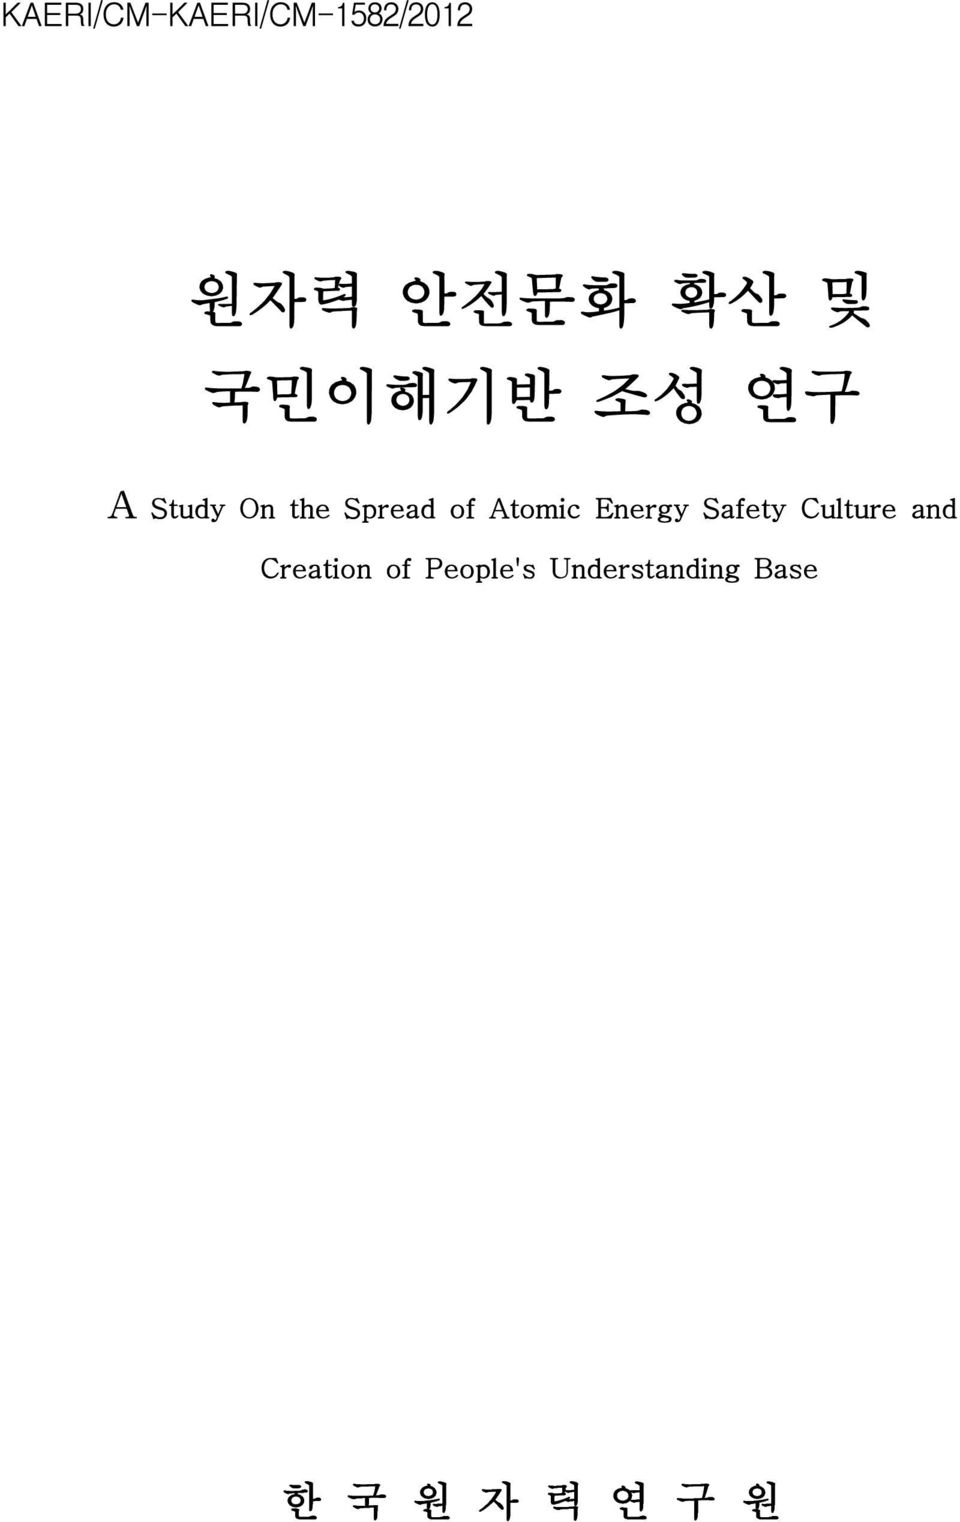 Atomic Energy Safety Culture and Creation